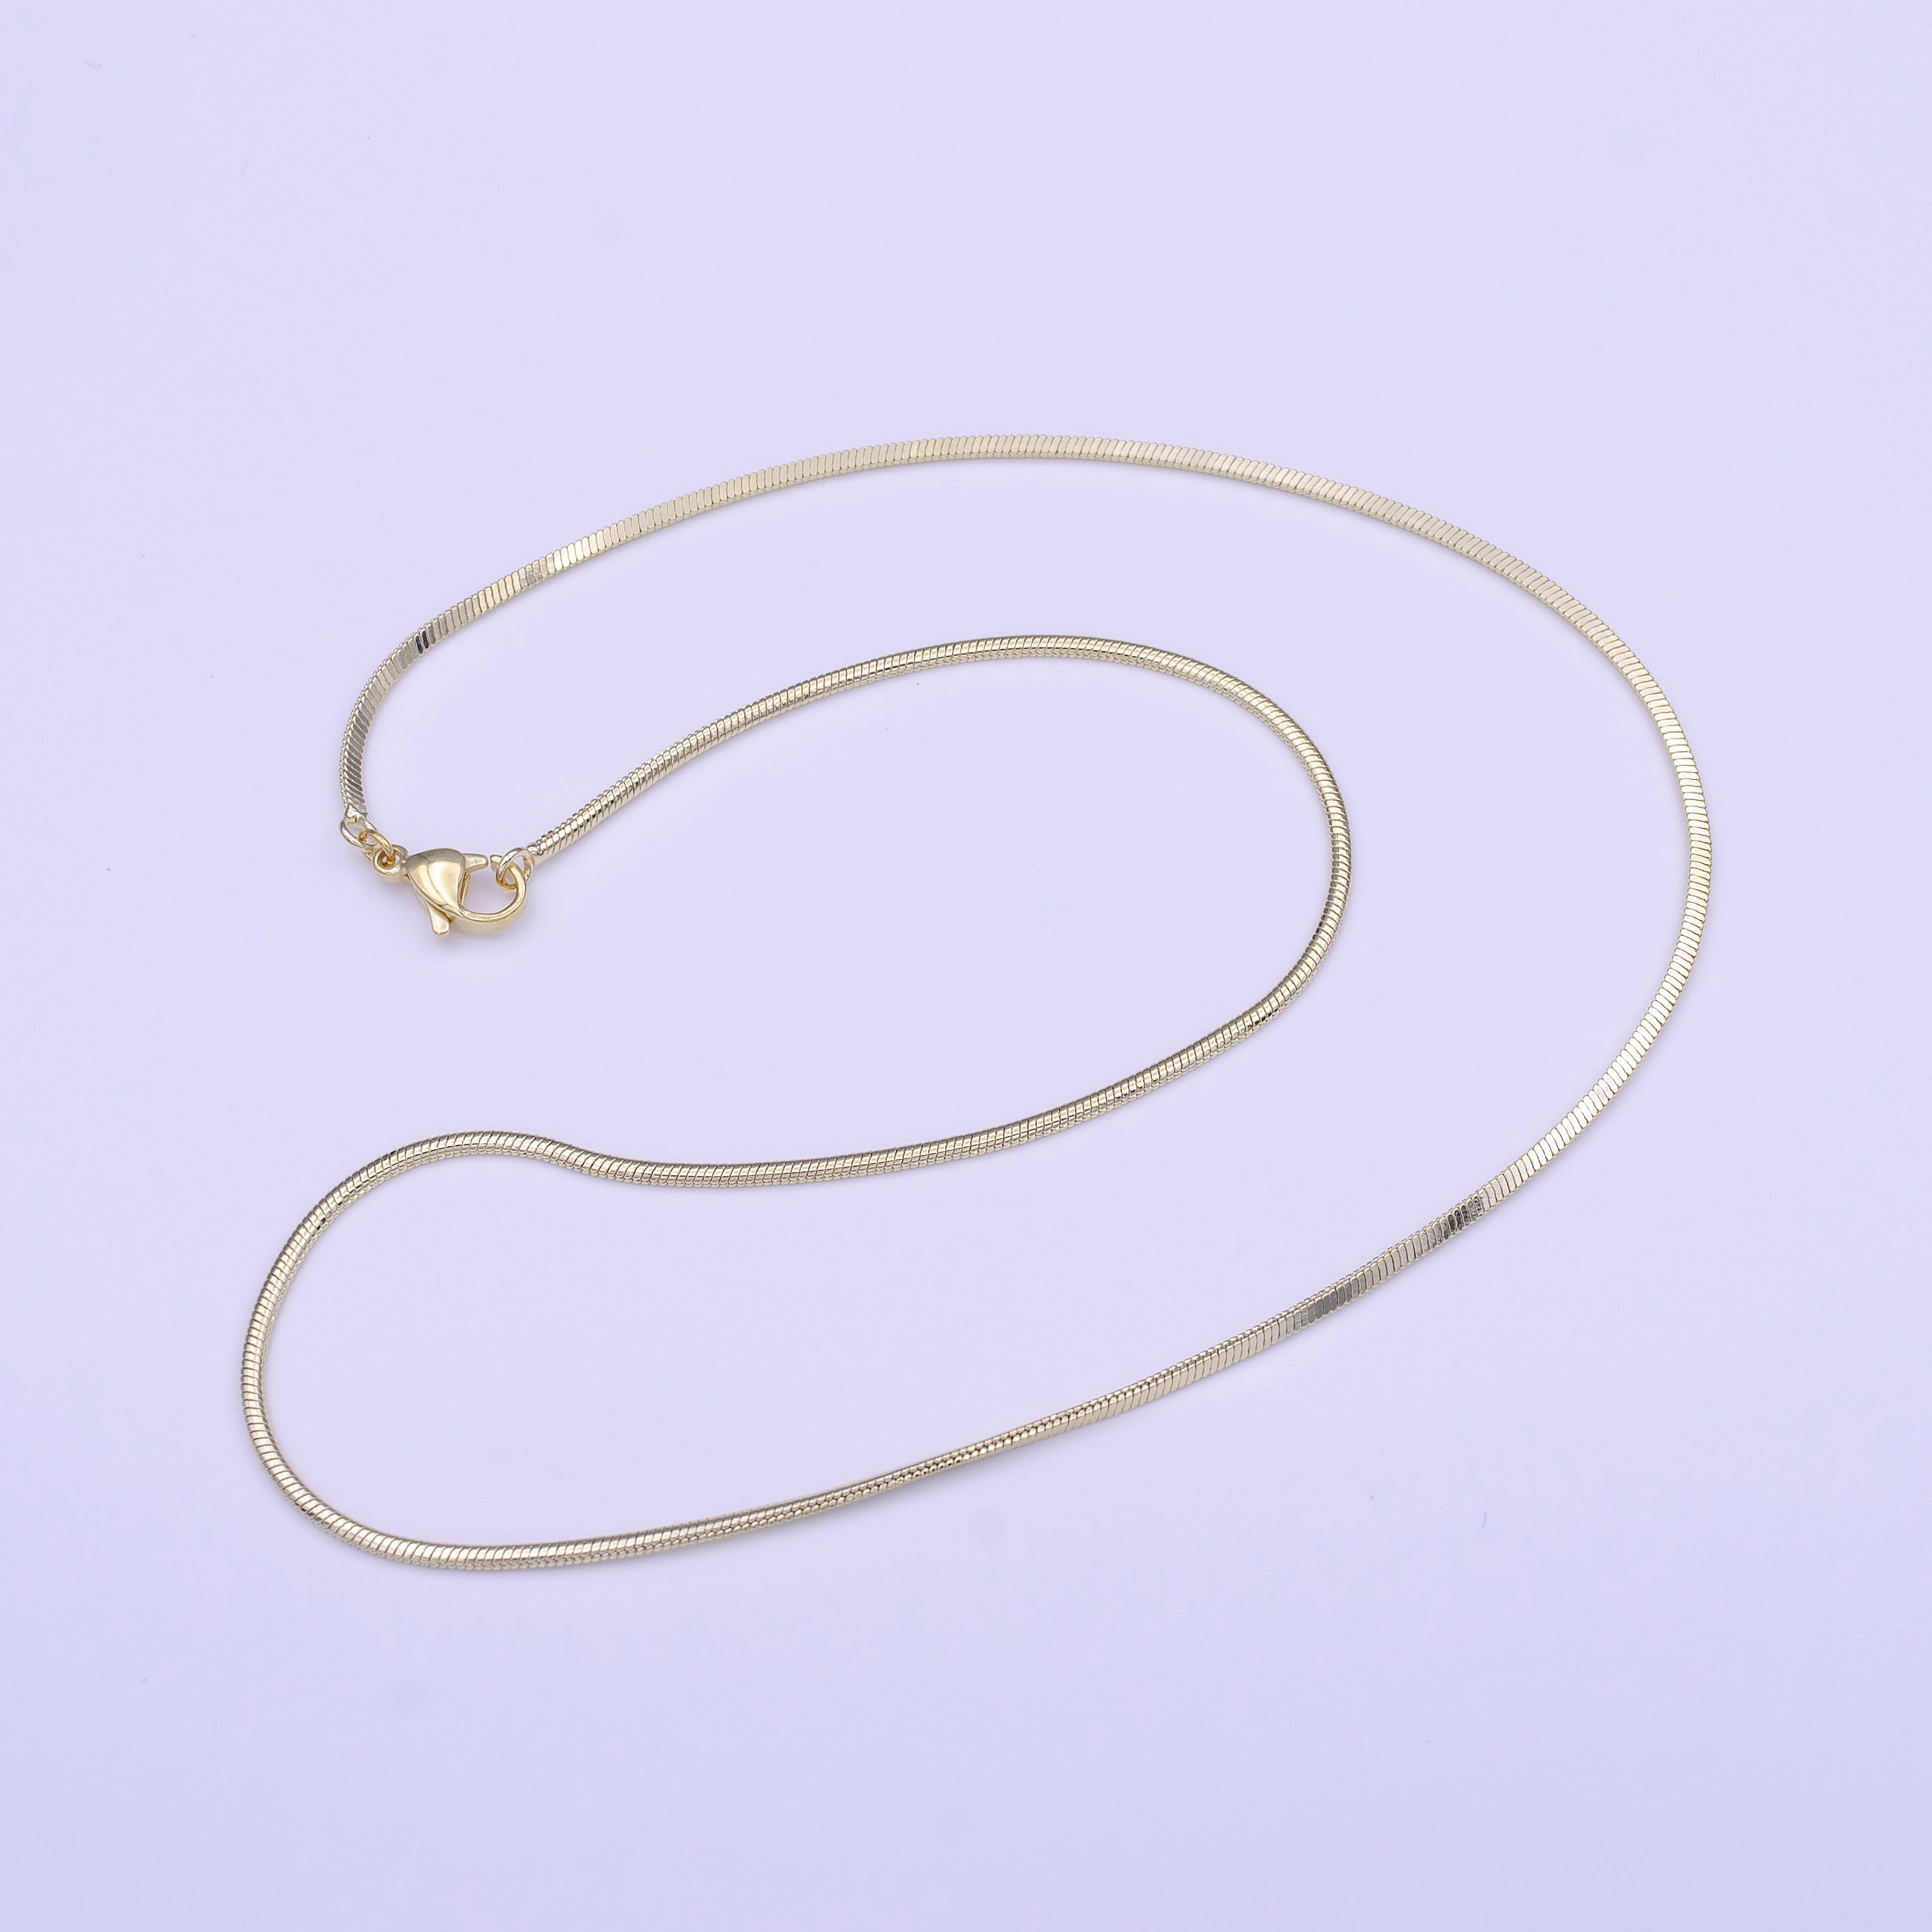 14K Gold Filled Dainty 1.5mm Omega 18 Inch Chain Necklace w. Lobster Clasps Closure | WA-1456 - DLUXCA